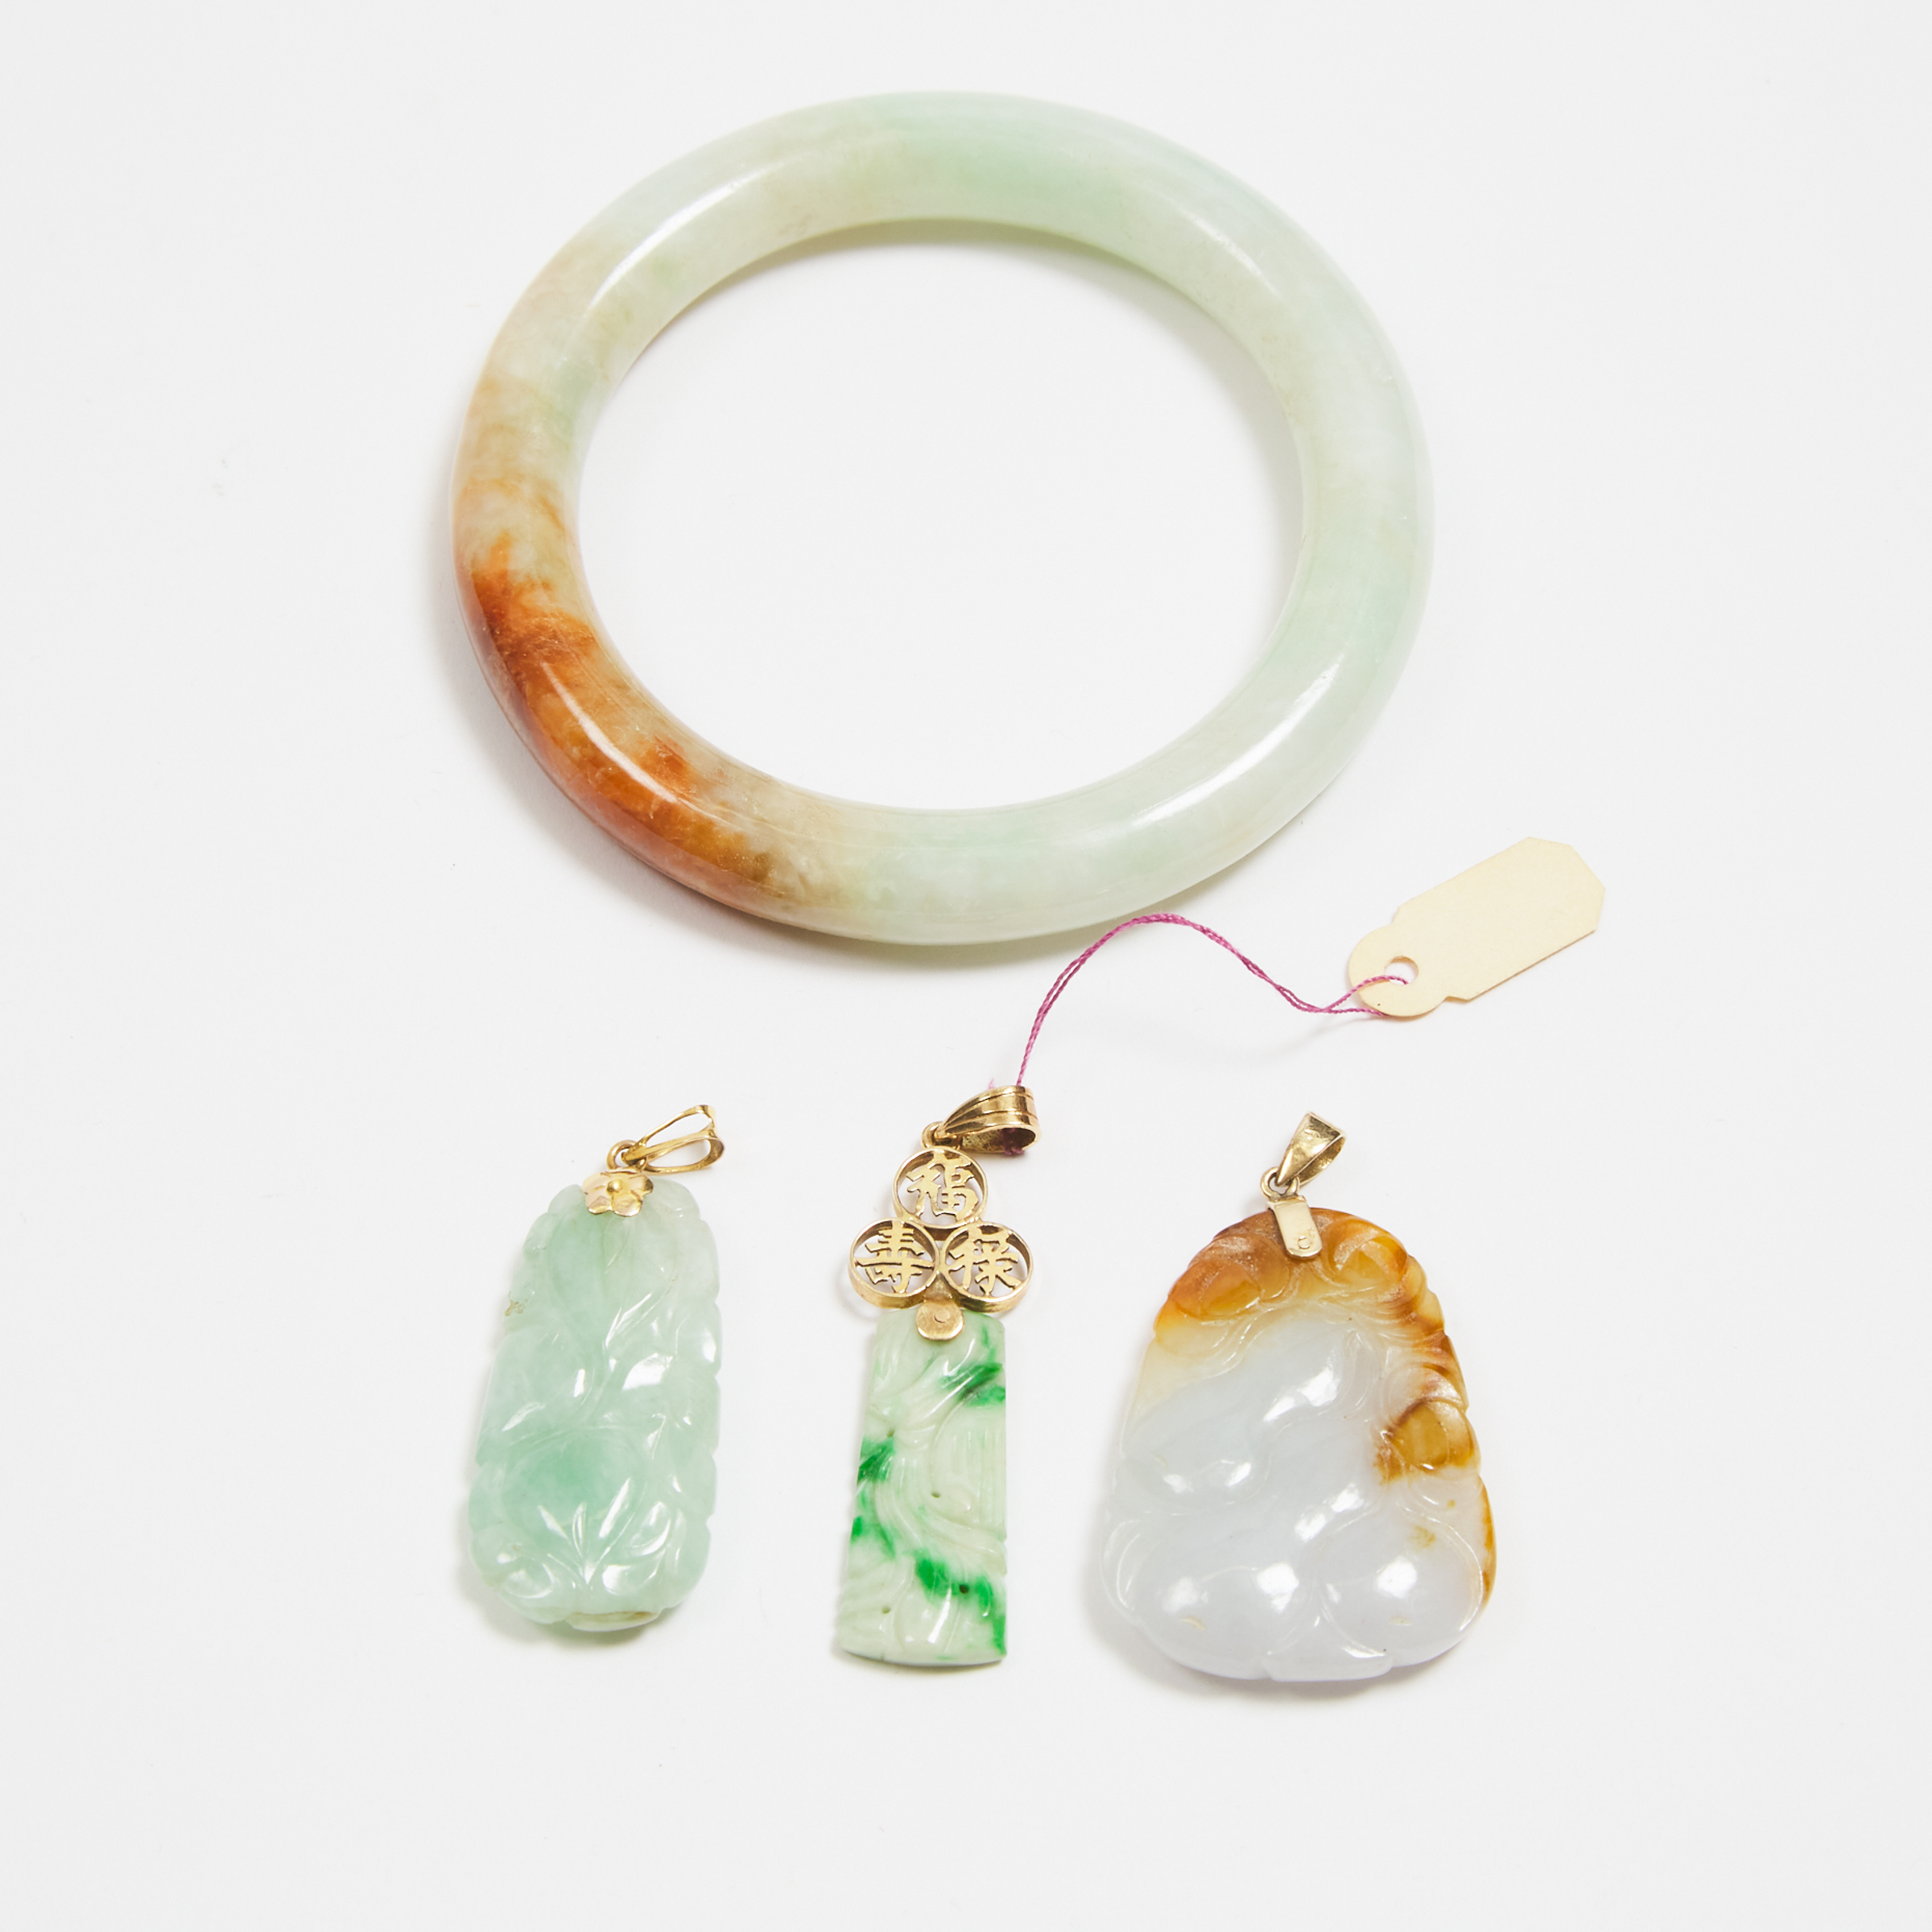 A Group of Four Natural Jadeite Pendants and Bangle, Republican Period